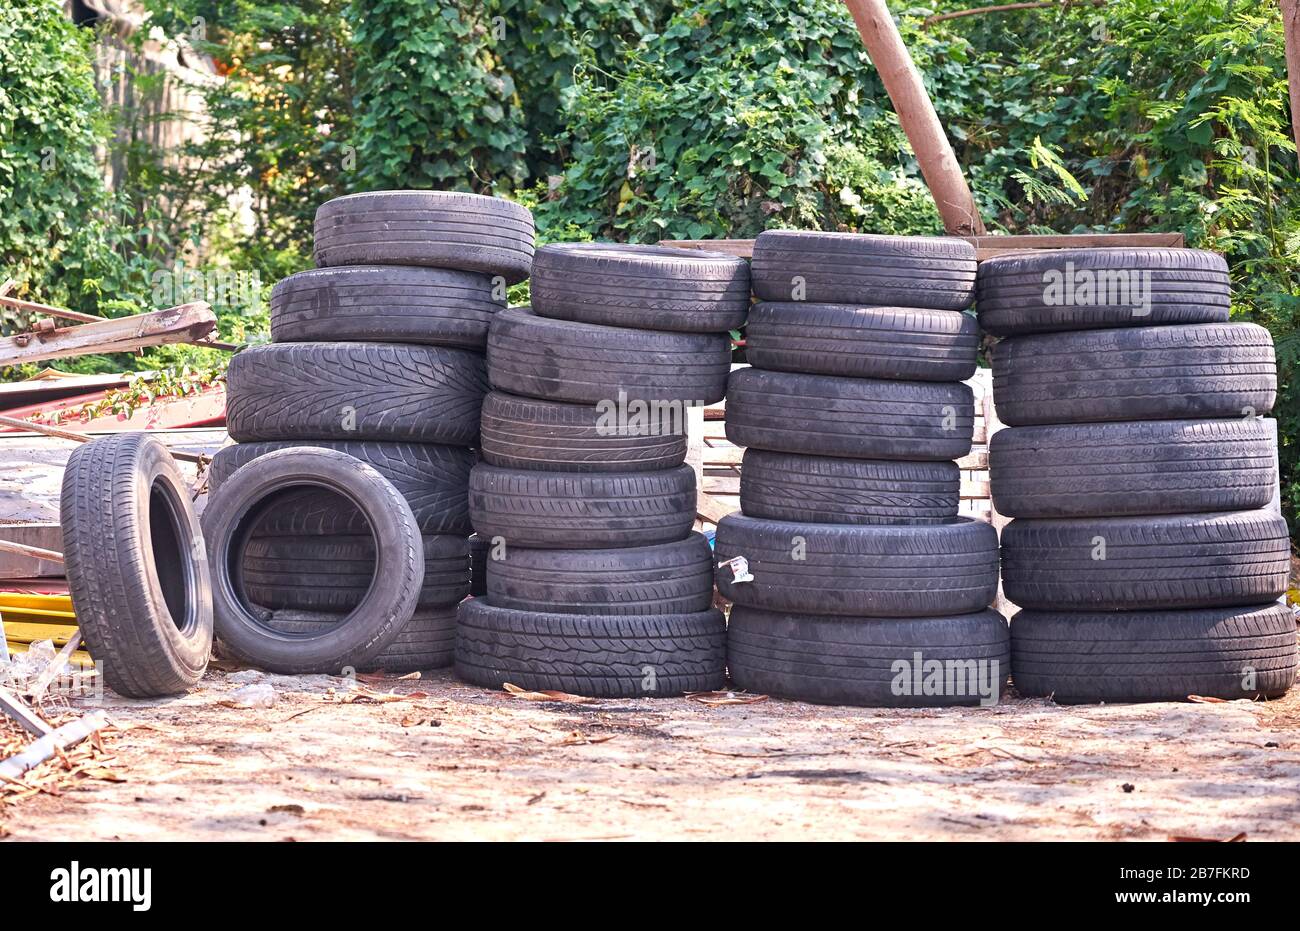 A heap of old worn tires. Stock Photo